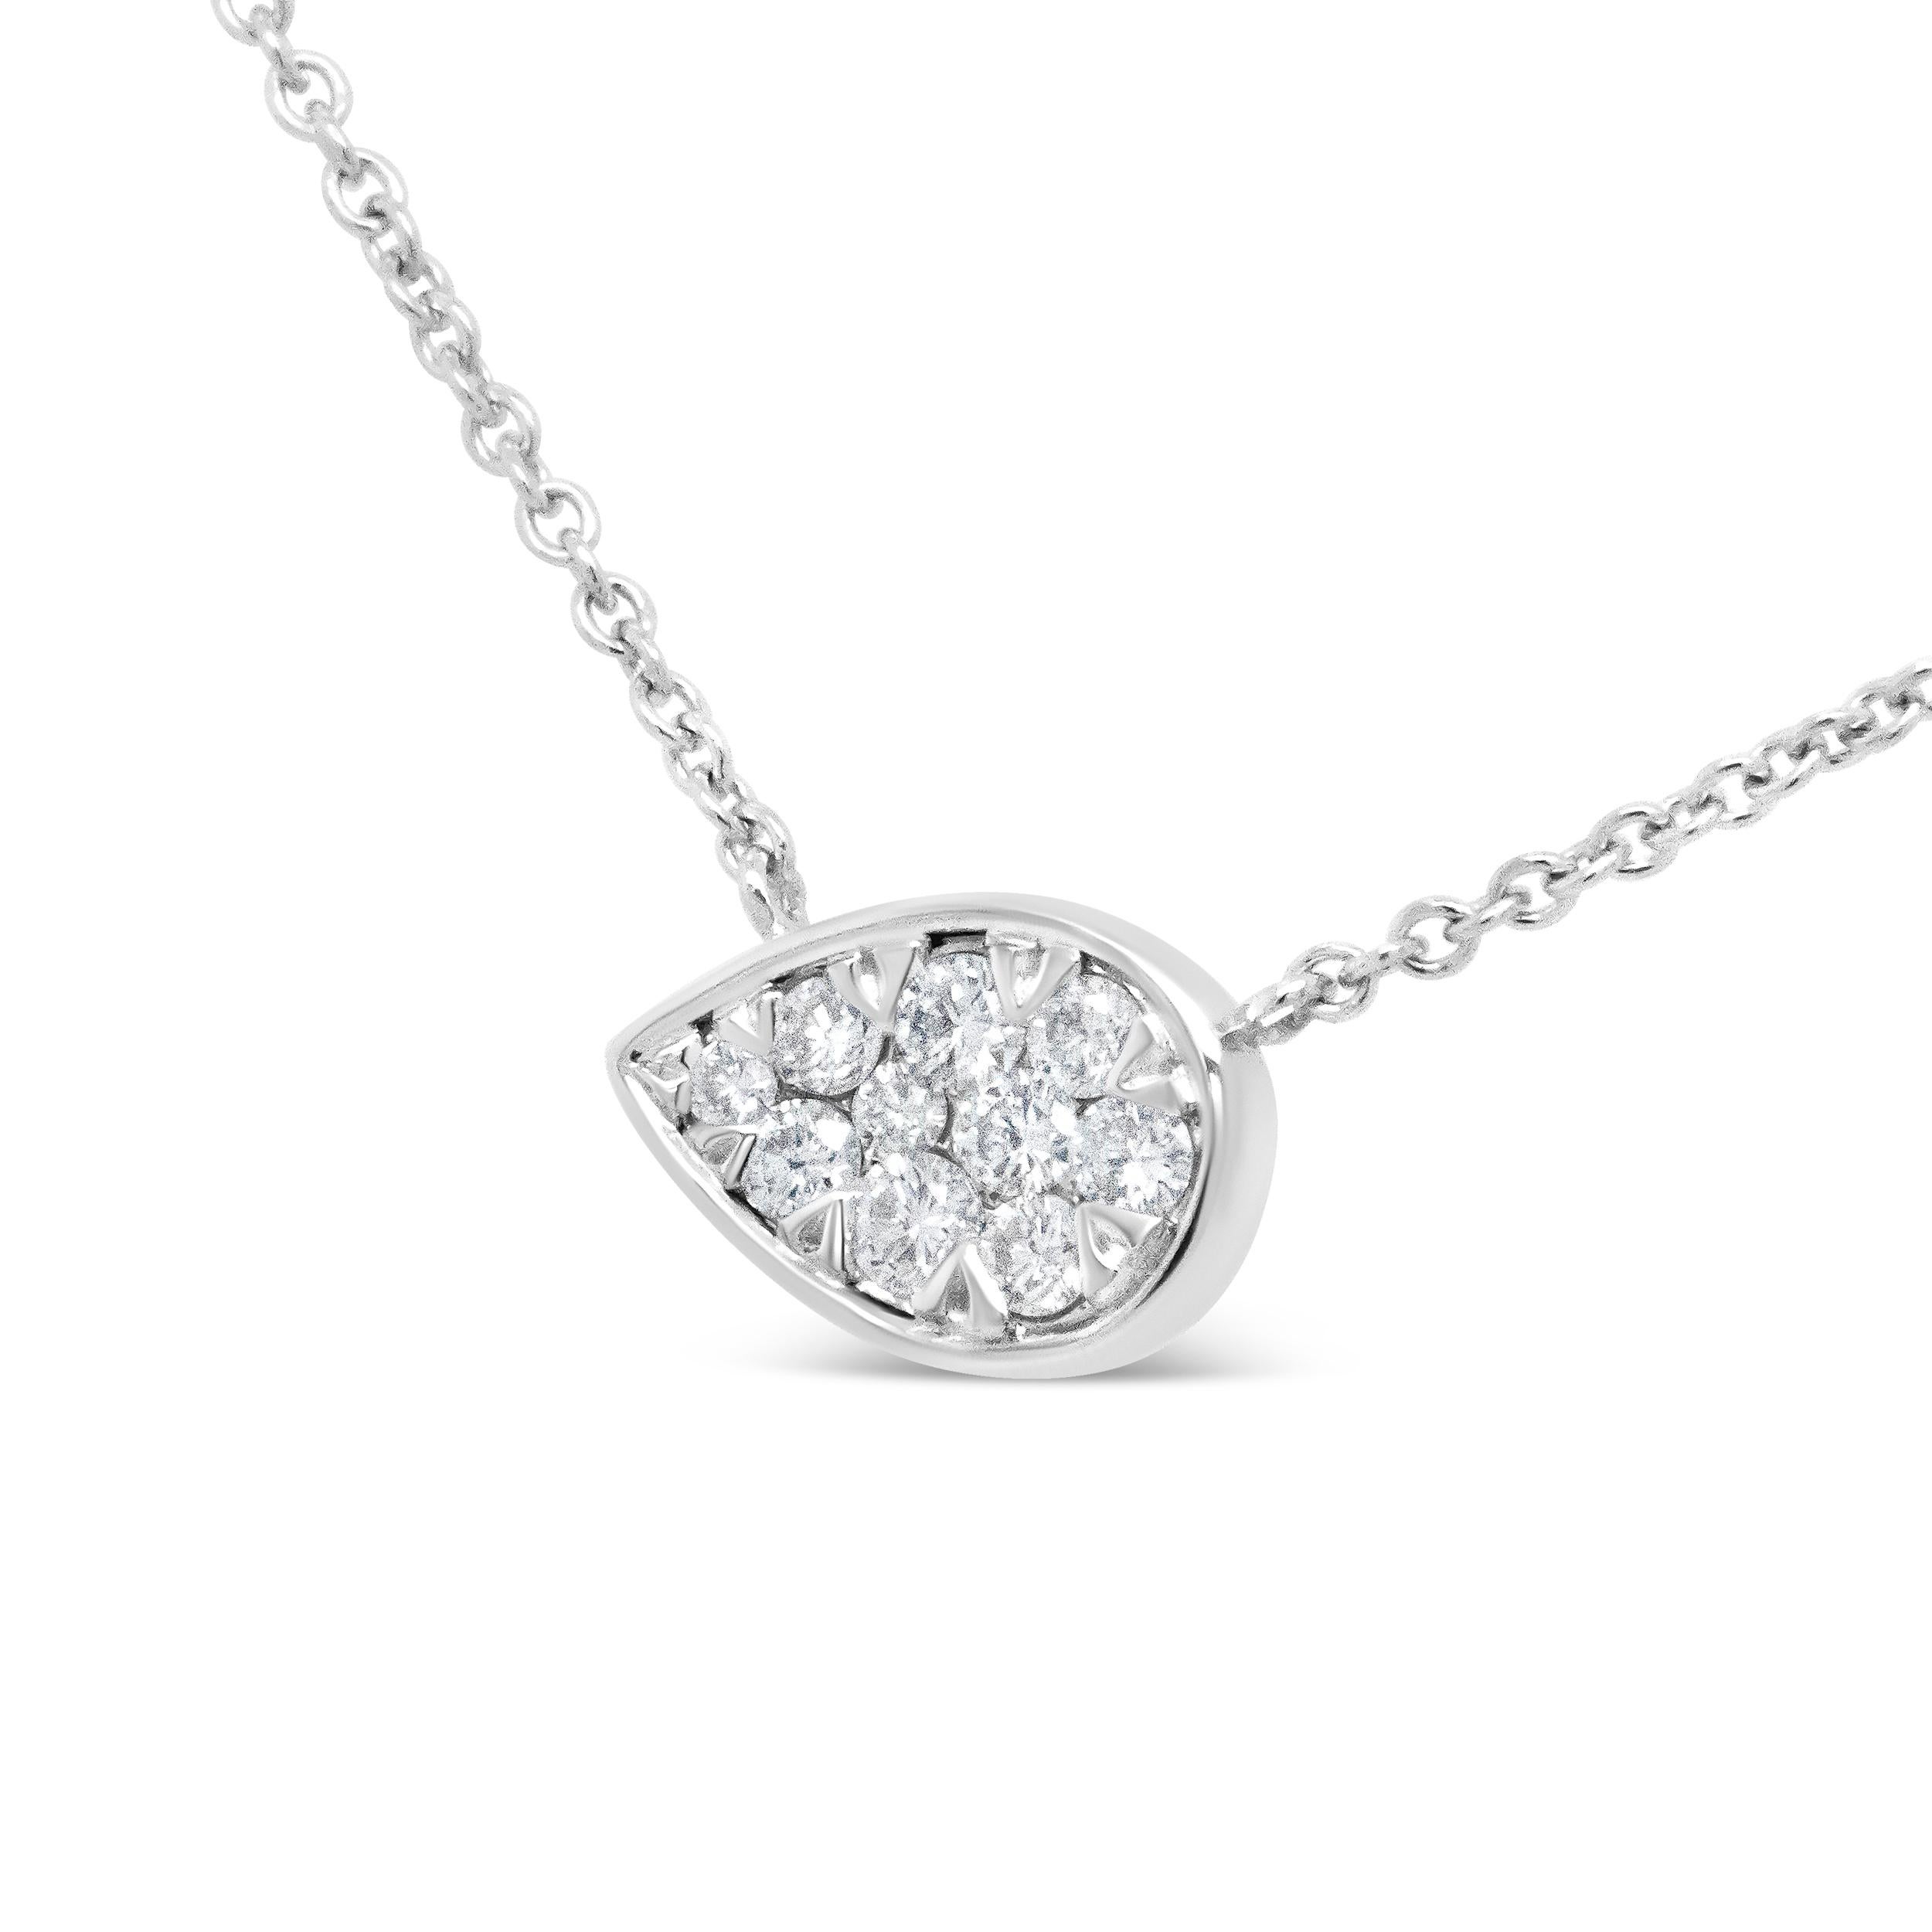 This 14k white gold necklace is alive with feminine energy and grace, emboldened by a horizontal teardrop silhouette comprised of a cluster of gradual-sized round white diamonds in pave-settings. These diamonds total 1/4 Cttw and are of an